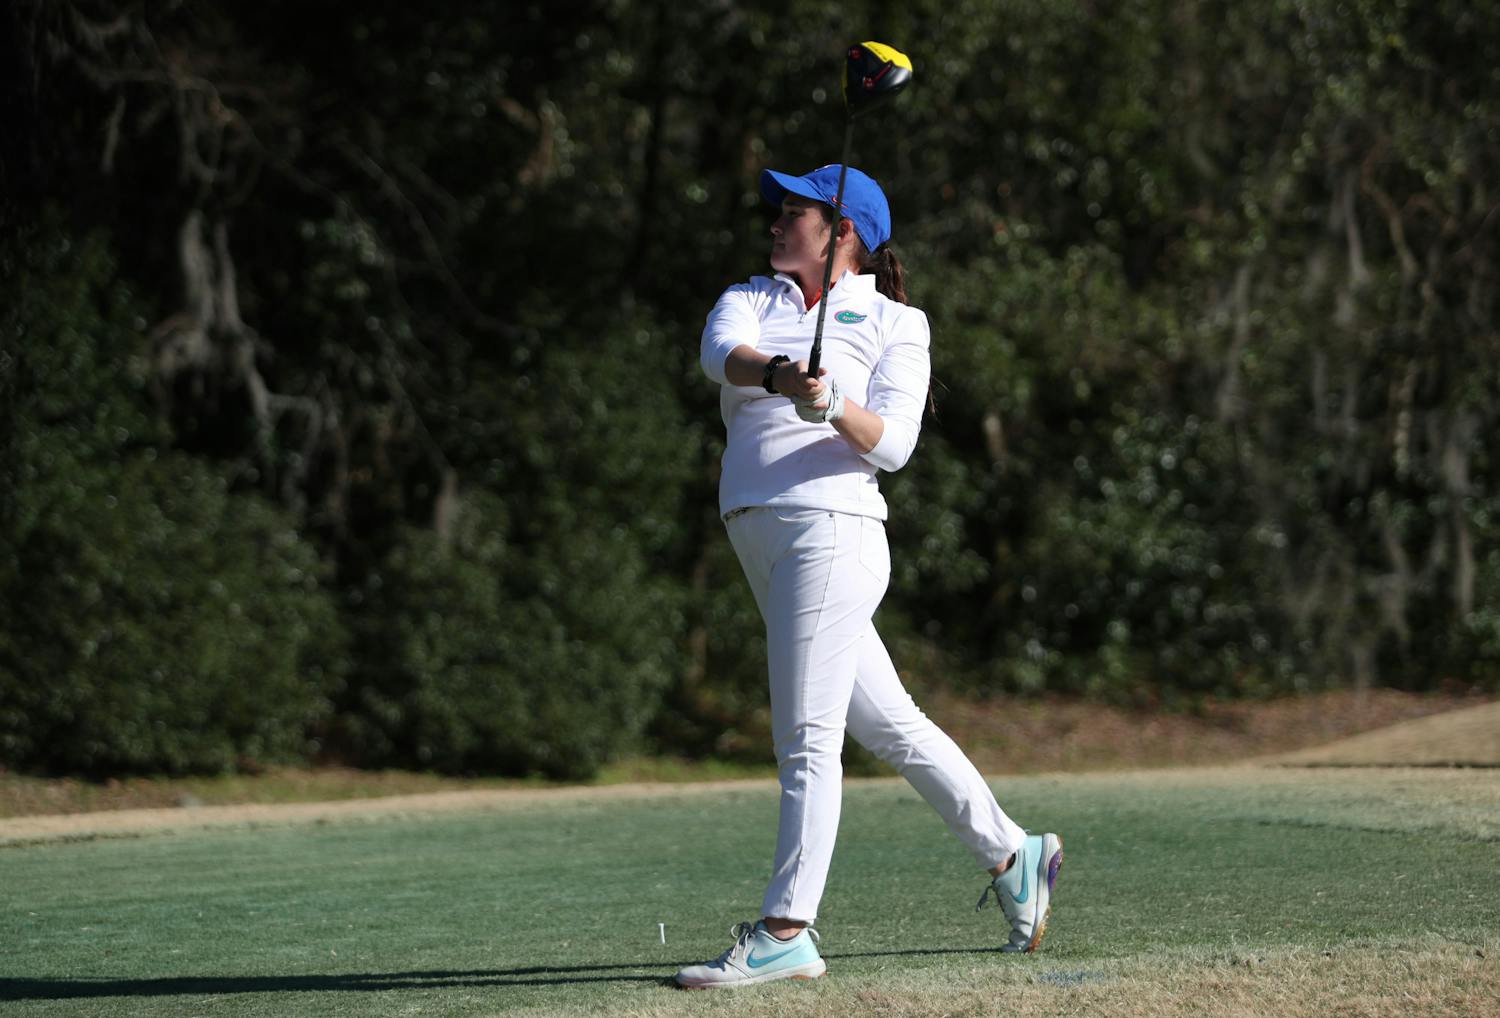 Florida Gators women's golf practice Monday, February 14, 2022 at the Mark Bostick Golf Course in Gainesville, FL / UAA Communications photo by Leslie White